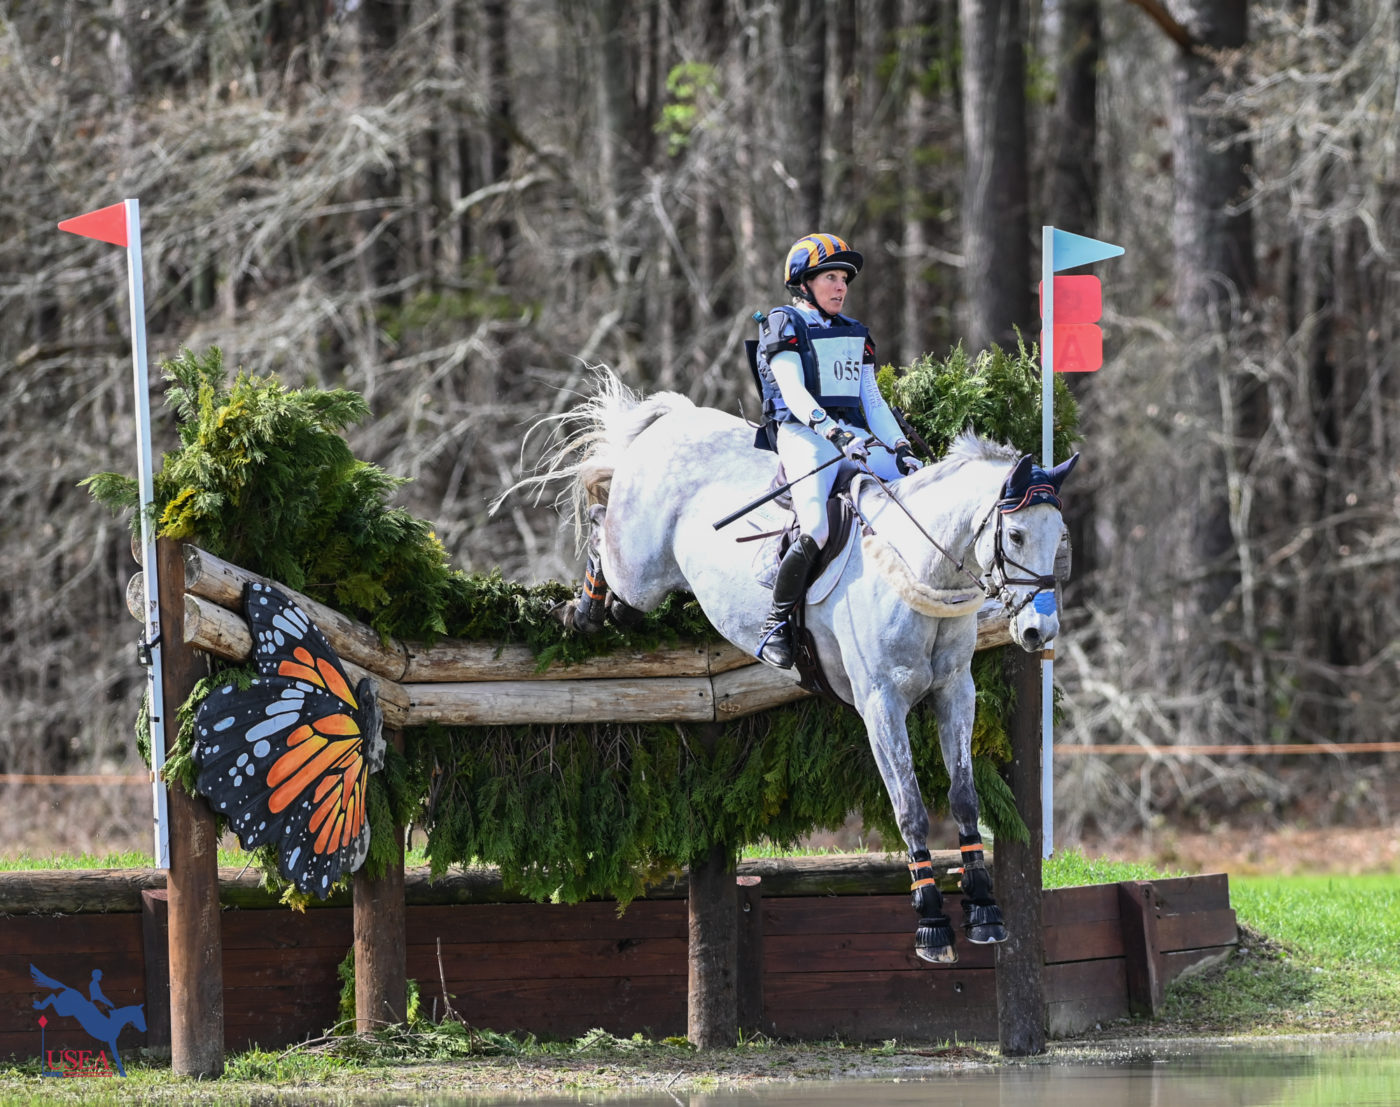 Liz Halliday-Sharp won the CCI3*-S at Carolina from start to finish with Cooley Be Cool. USEA/Lindsay Berreth photo